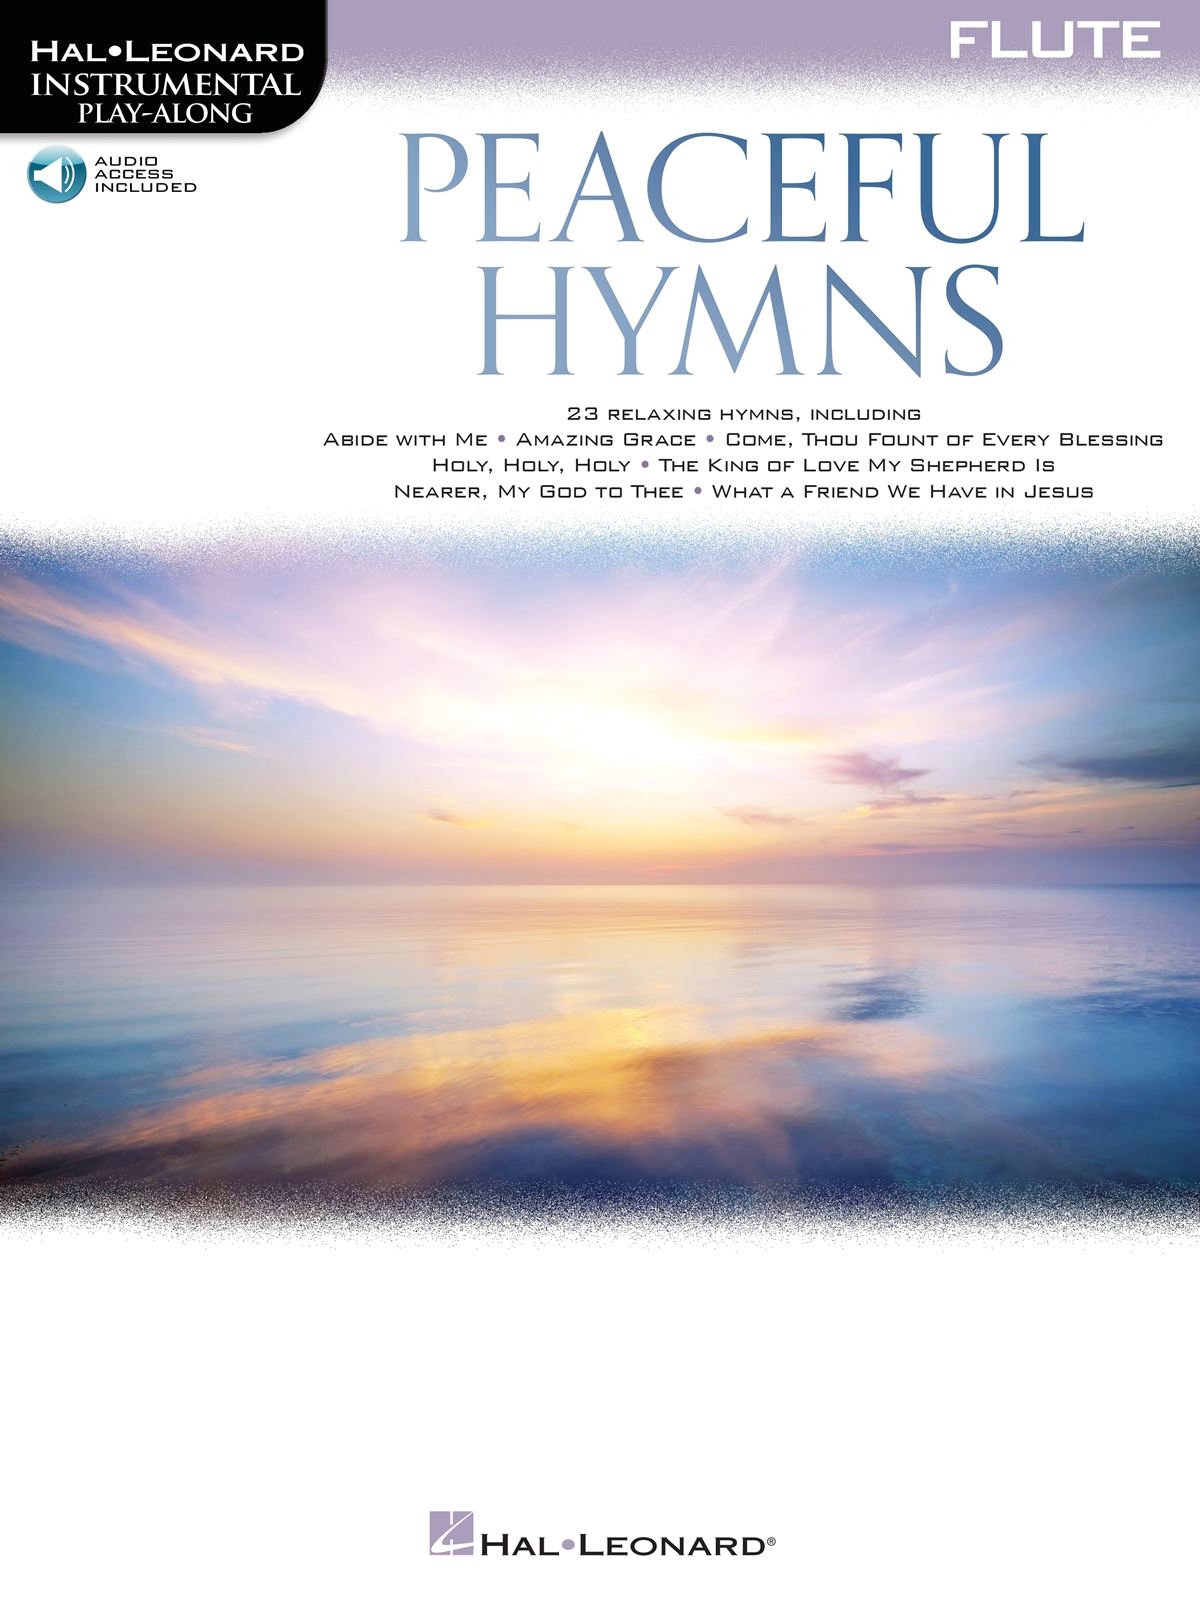 Peaceful Hymns for Flute